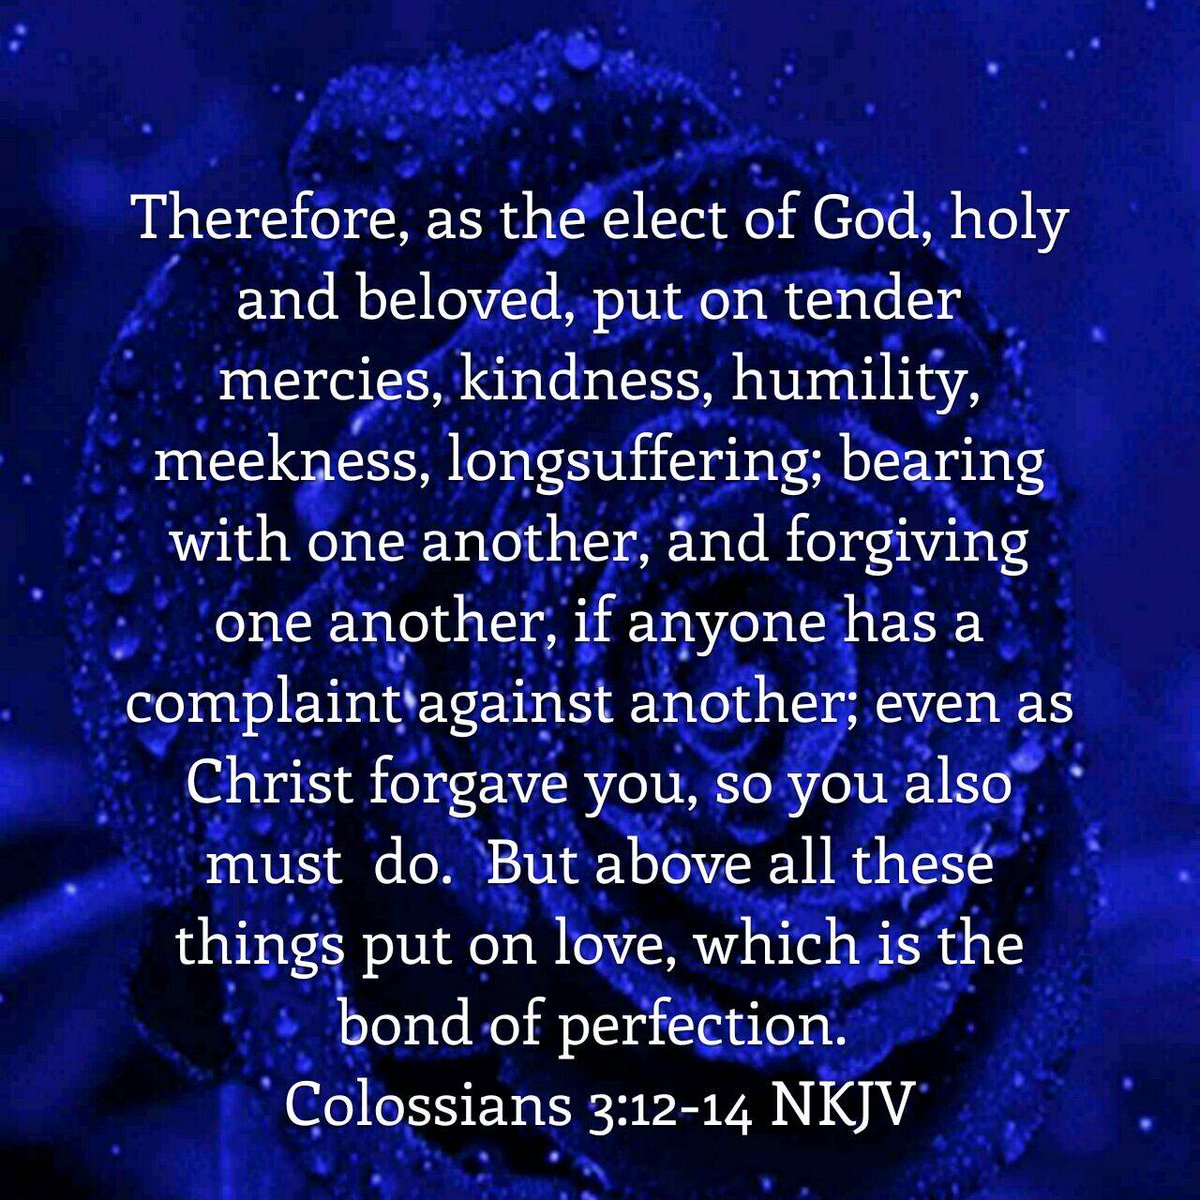 Colossians 3:12-14 NKJV [12] Therefore, as the elect of God, holy and beloved, put on tender mercies, kindness, humility, meekness, longsuffering; [13] bearing with one another, and forgiving one another, if anyone has a complaint against another; even as Christ forgave you,